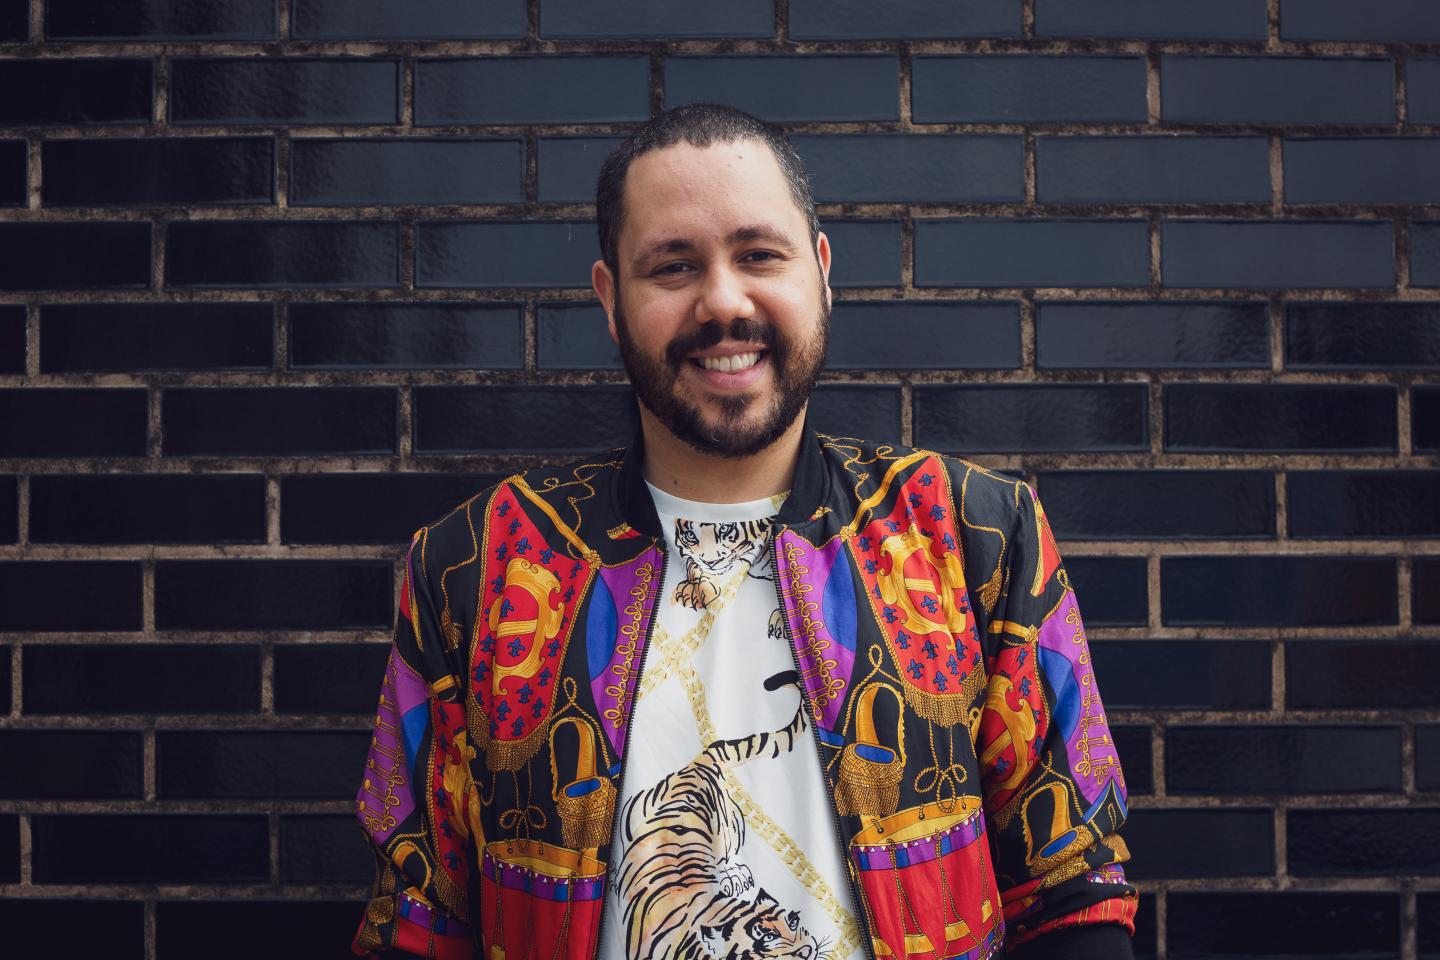 Adam stands in front of a black brick wall wearing a multi-coloured jacket and white t-shirt with a tiger on it